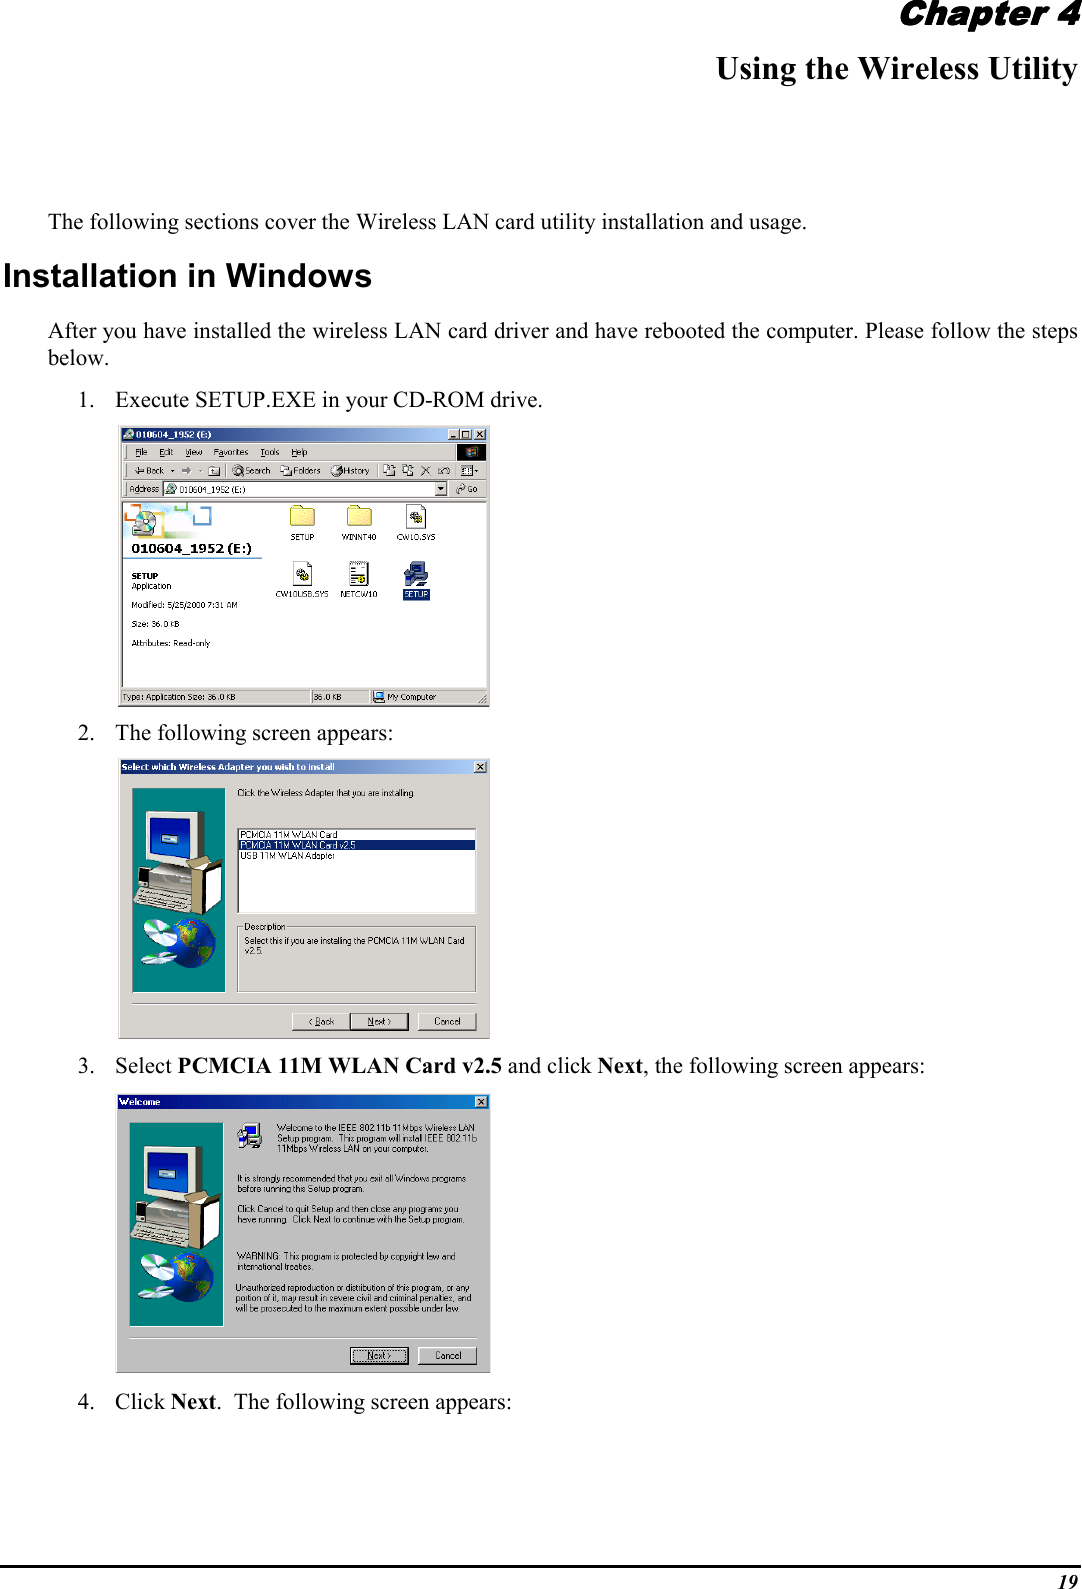 19Chapter 4Chapter 4Chapter 4Chapter 4Using the Wireless UtilityThe following sections cover the Wireless LAN card utility installation and usage.Installation in WindowsAfter you have installed the wireless LAN card driver and have rebooted the computer. Please follow the stepsbelow.1. Execute SETUP.EXE in your CD-ROM drive.       2. The following screen appears:       3. Select PCMCIA 11M WLAN Card v2.5 and click Next, the following screen appears:4. Click Next.  The following screen appears: